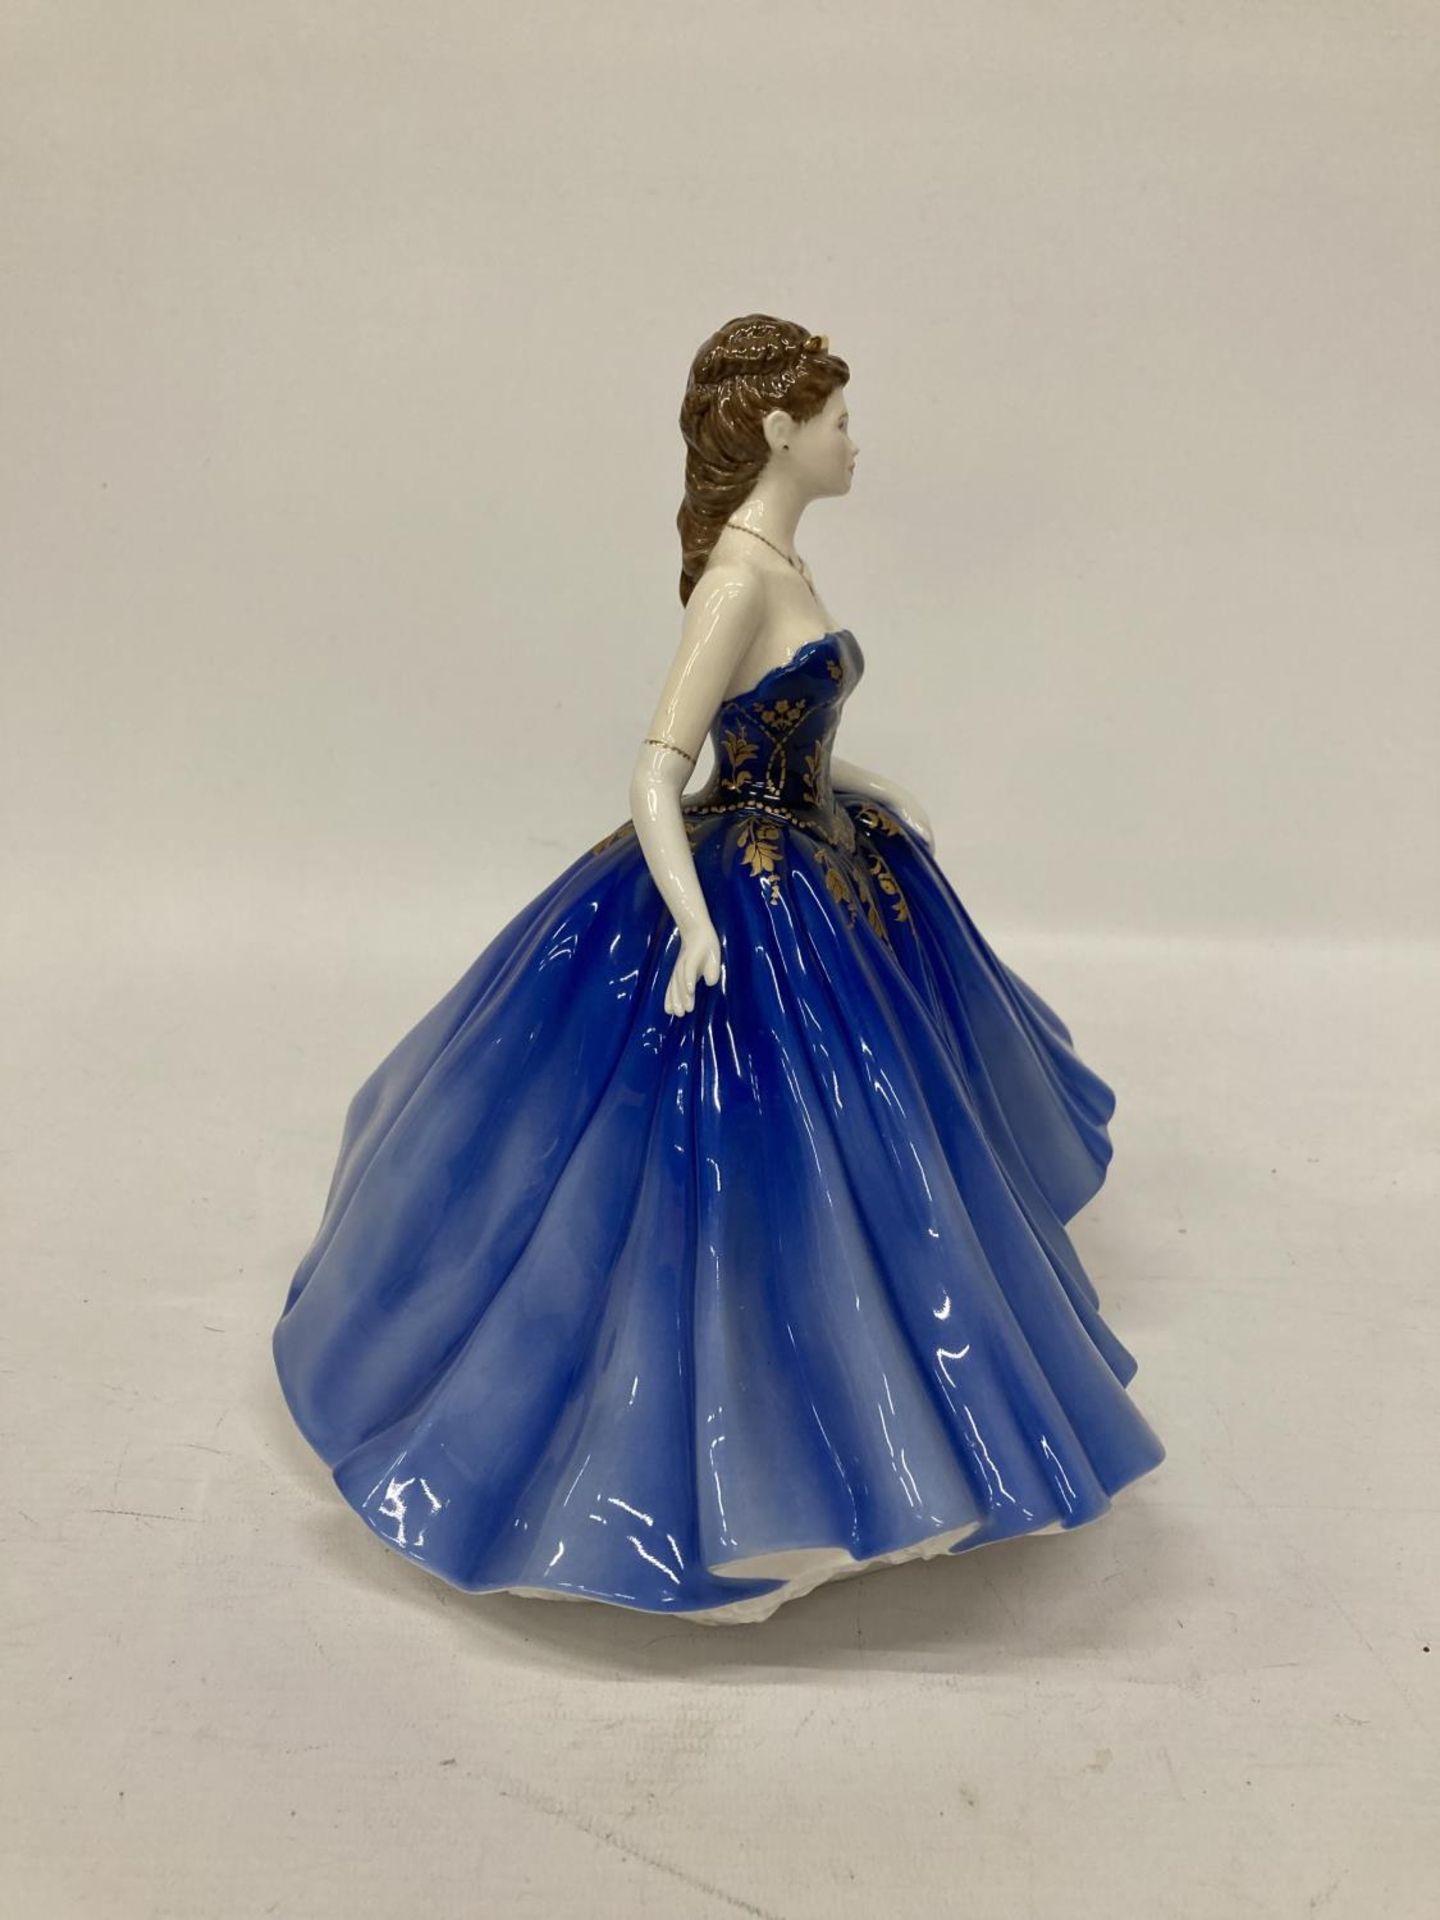 A ROYAL DOULTON FIGURINE FROM THE CLASSICS COLLECTION "ABIGAIL" LADY OF THE YEAR 2006 HN4824 - Image 2 of 5